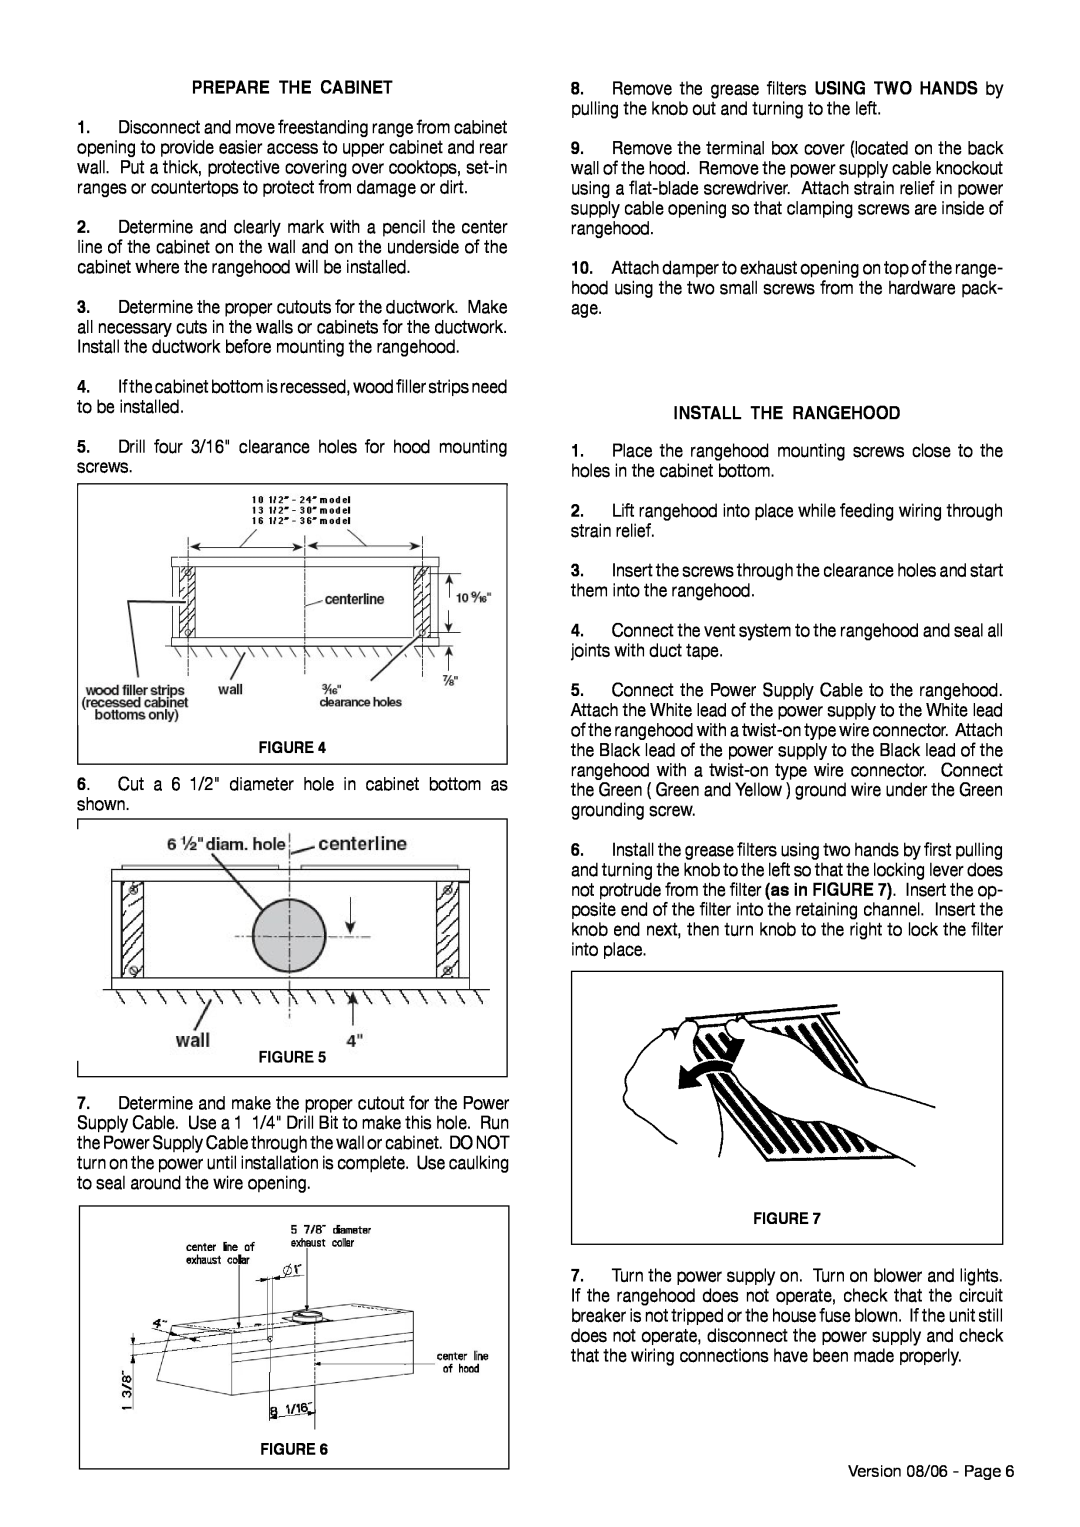 Faber Magnum installation instructions Prepare The Cabinet, Install The Rangehood 